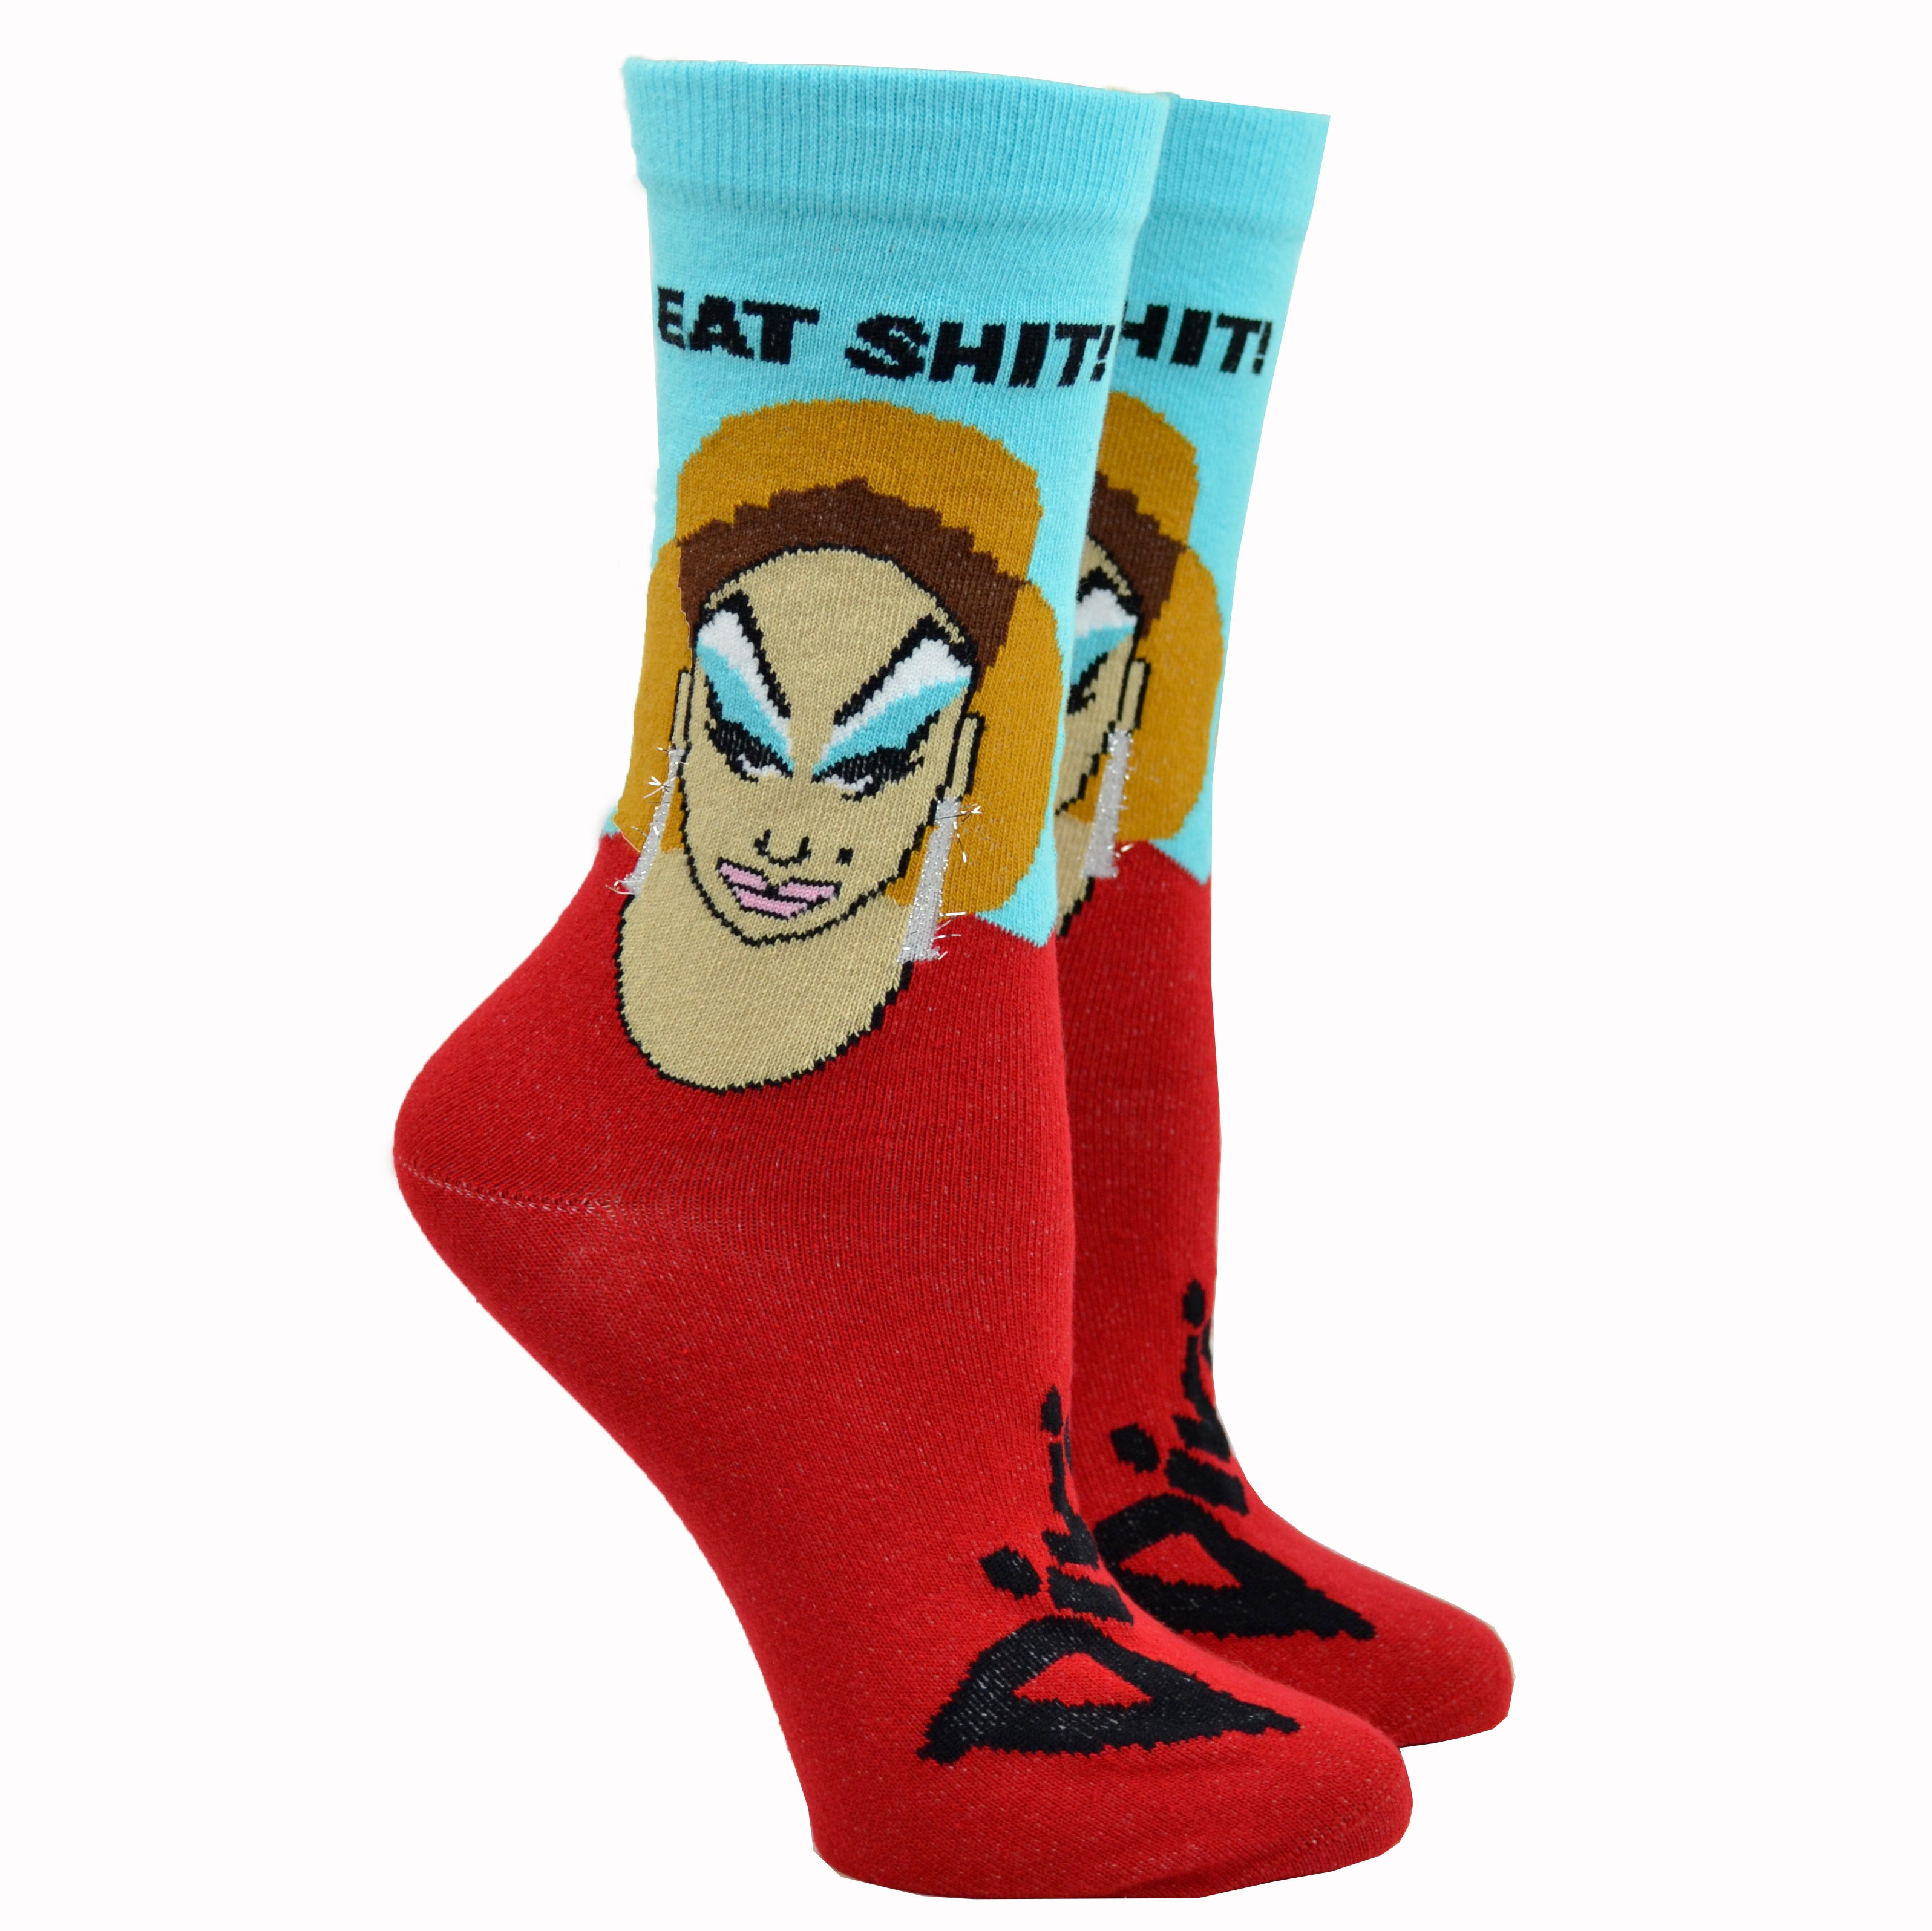 Shown on a leg form, these blue and red cotton unisex crew socks feature a portrait of the legendary drag queen Divine and the words 